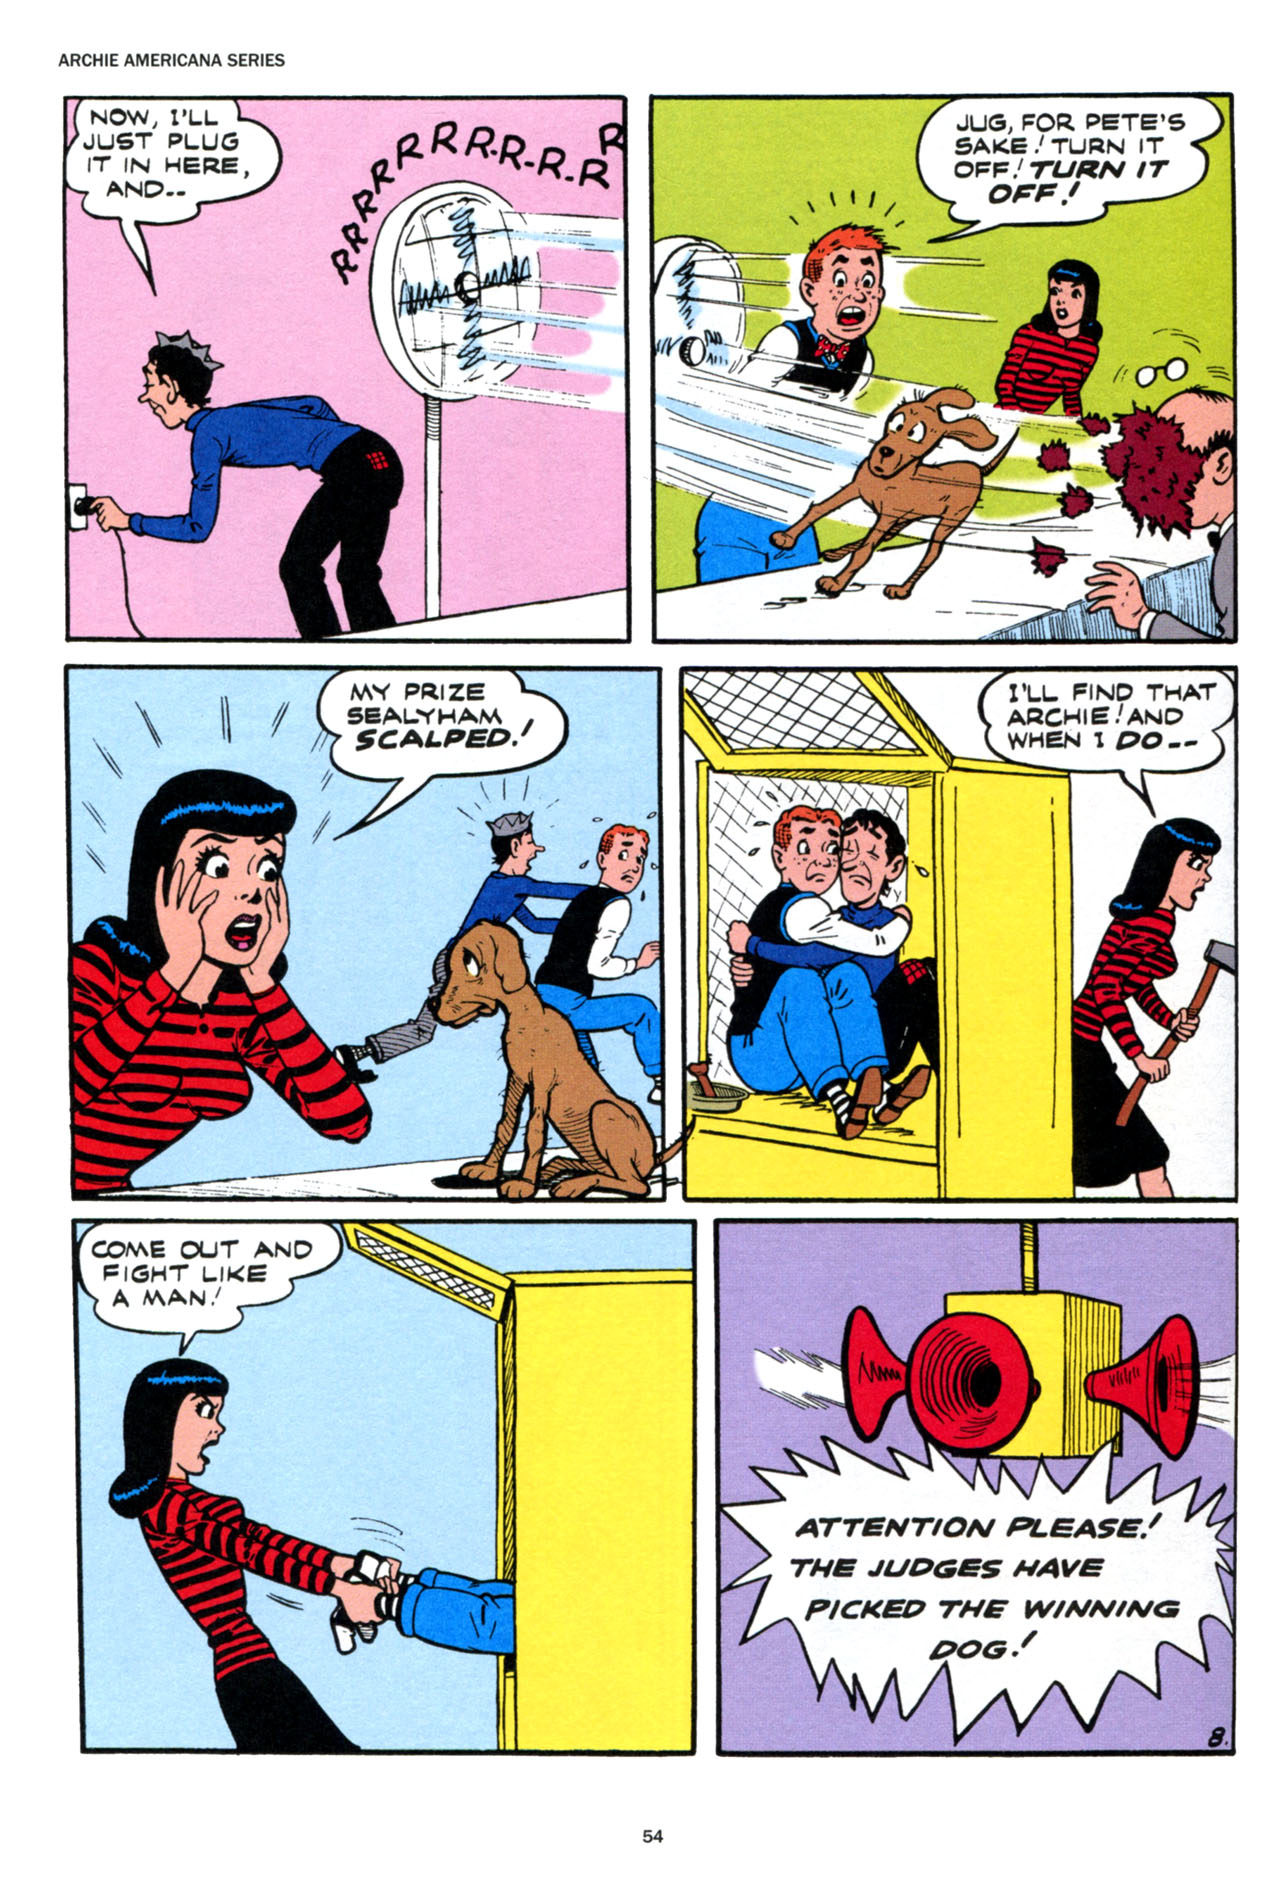 Read online Archie Americana Series comic -  Issue # TPB 6 - 55